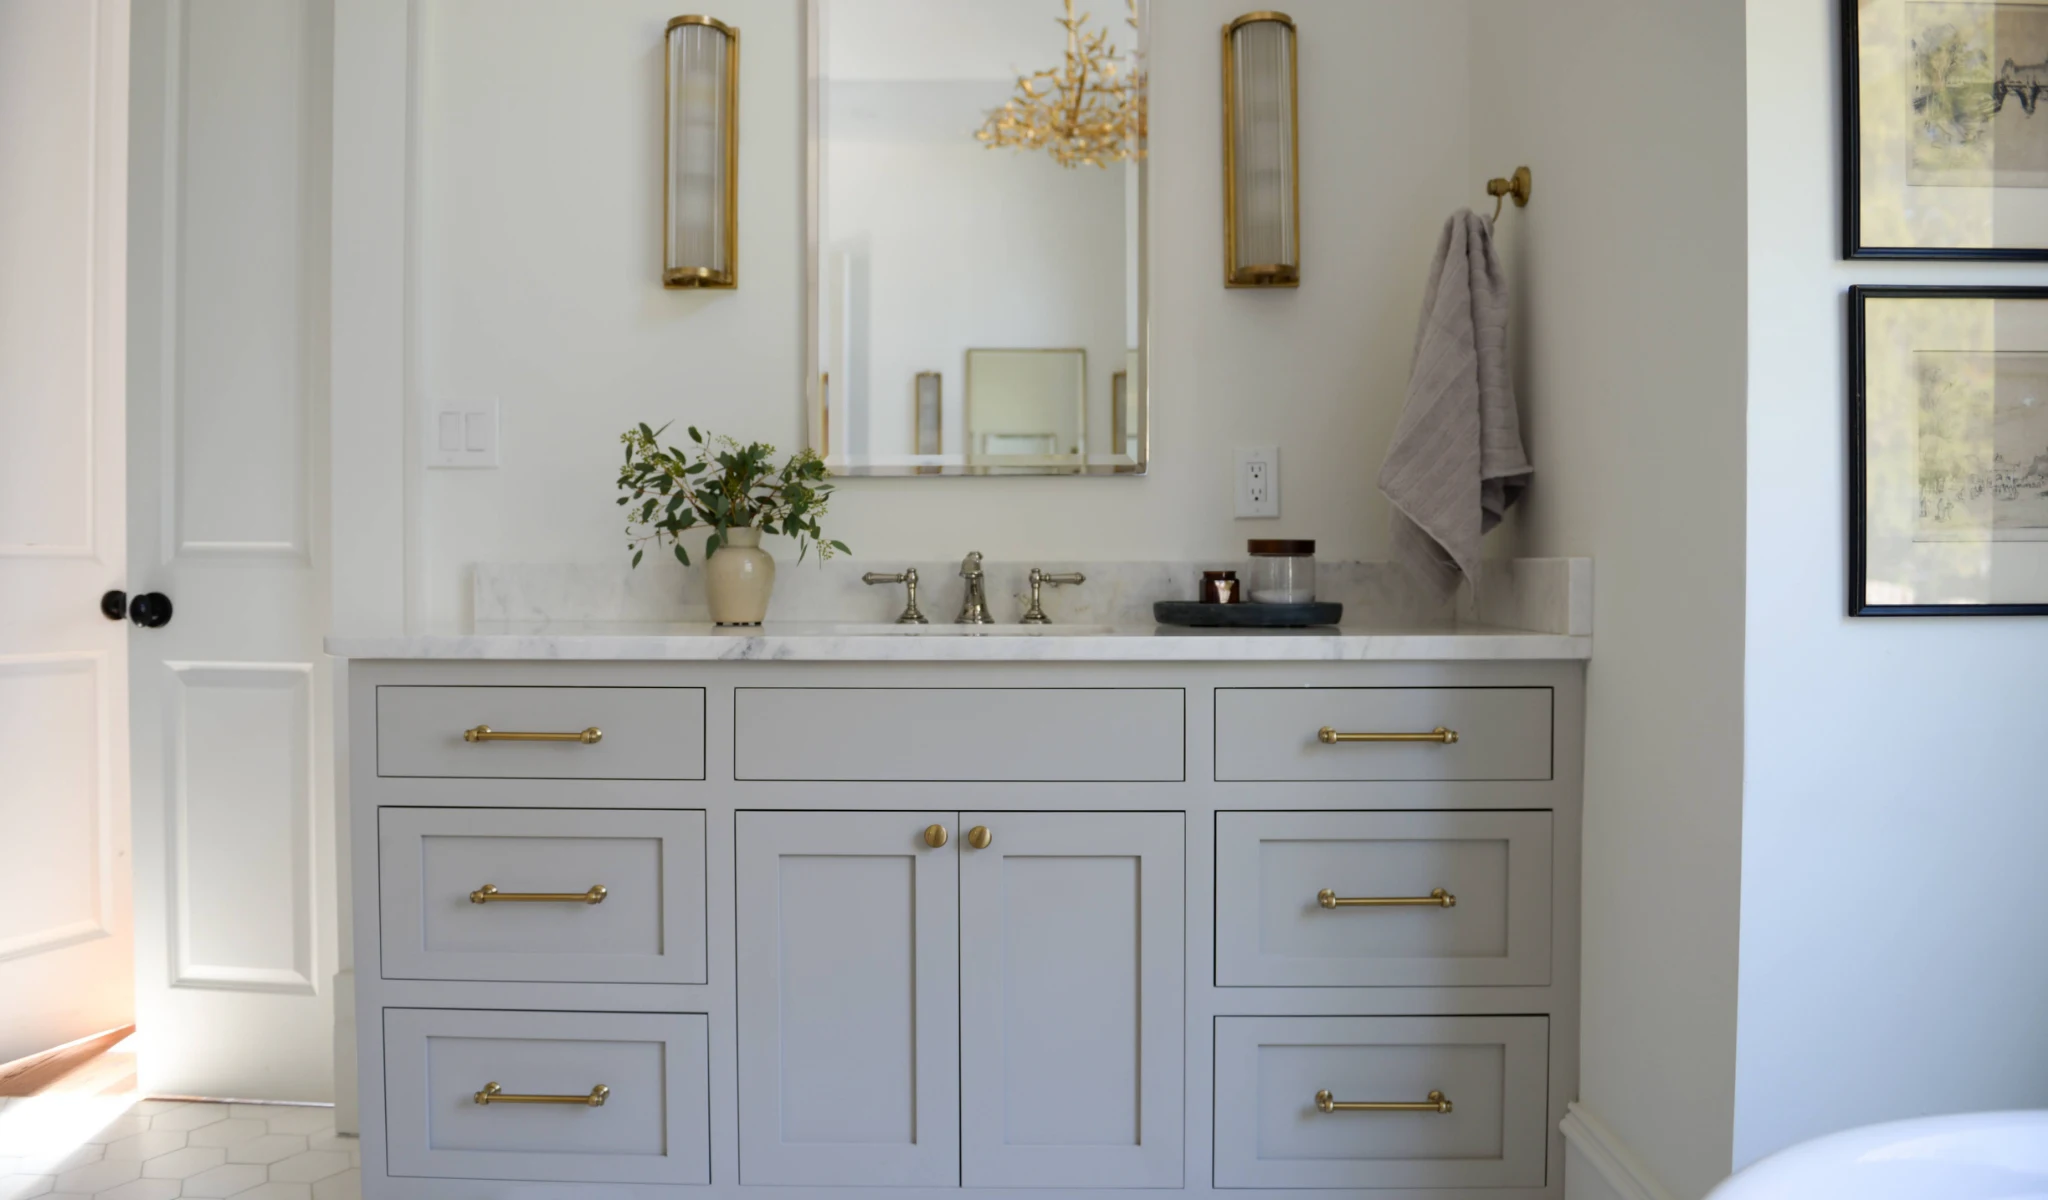 A bathroom with a white vanity and gold hardware designed by a home designer.